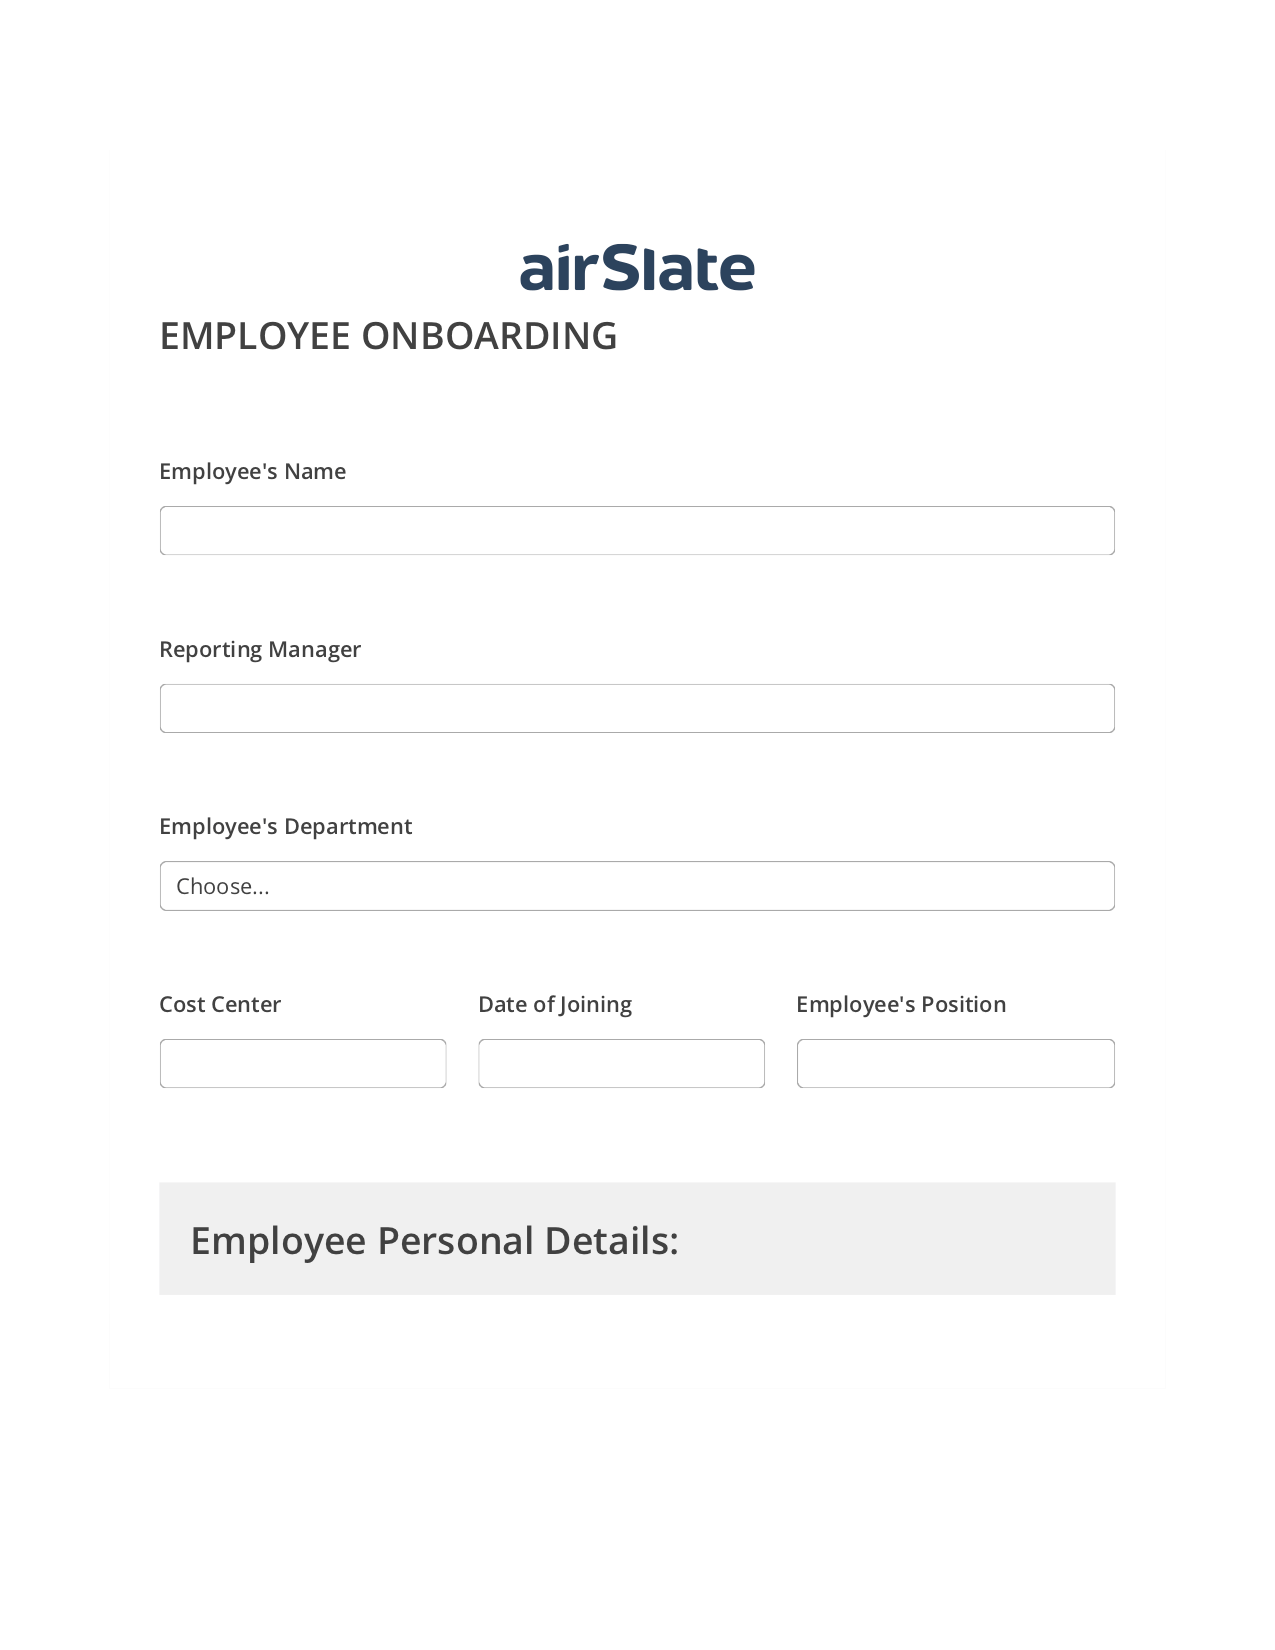 Employee Onboarding Workflow Prefill from NetSuite records, Add Tags to Slate Bot, Export to NetSuite Bot